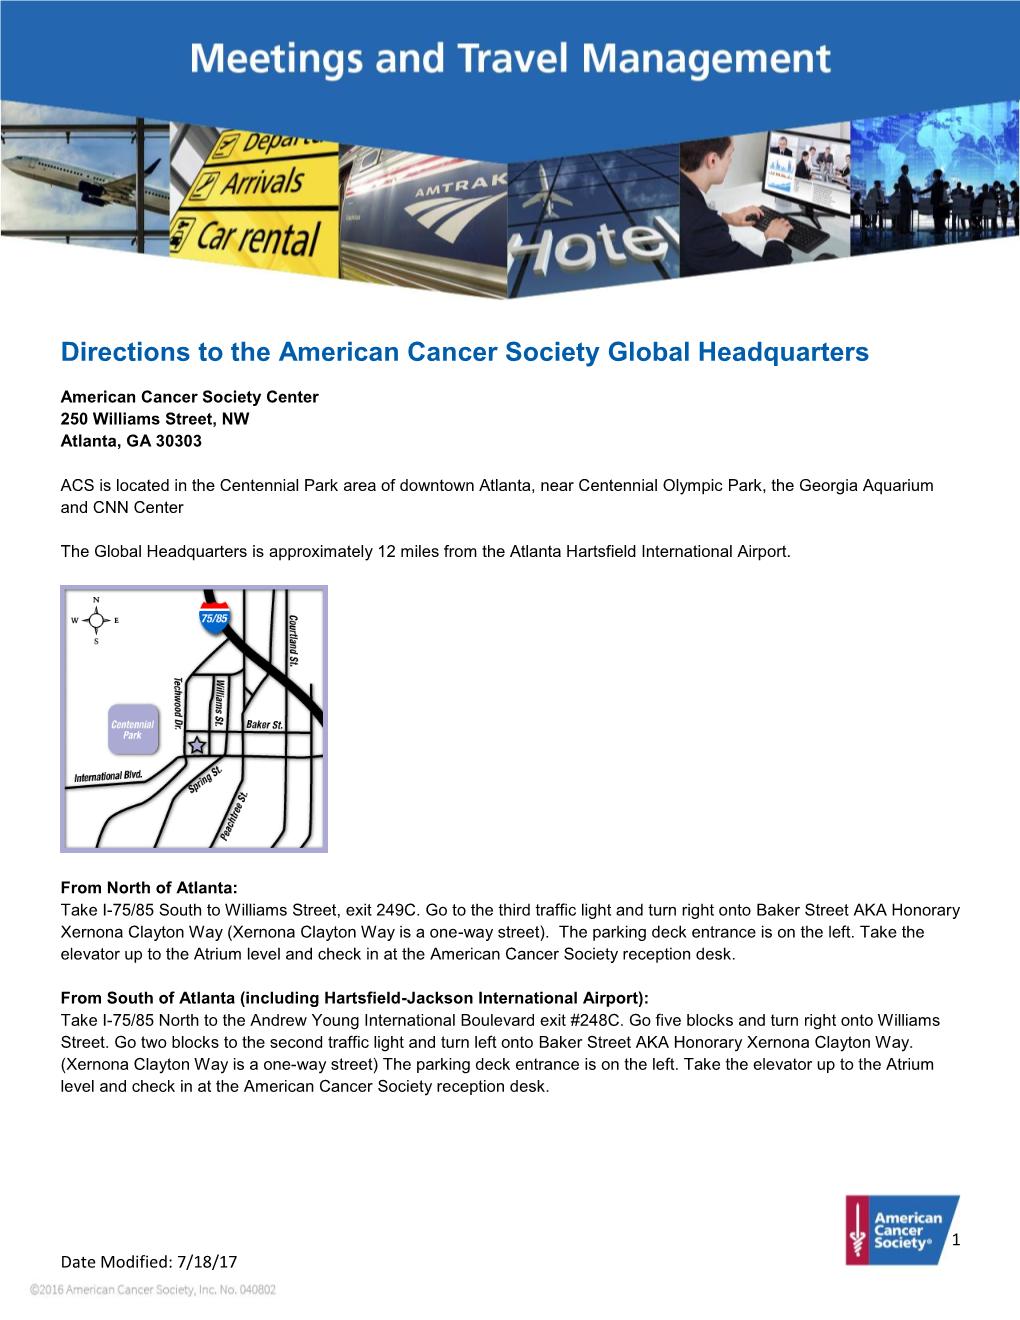 Directions to the American Cancer Society Global Headquarters